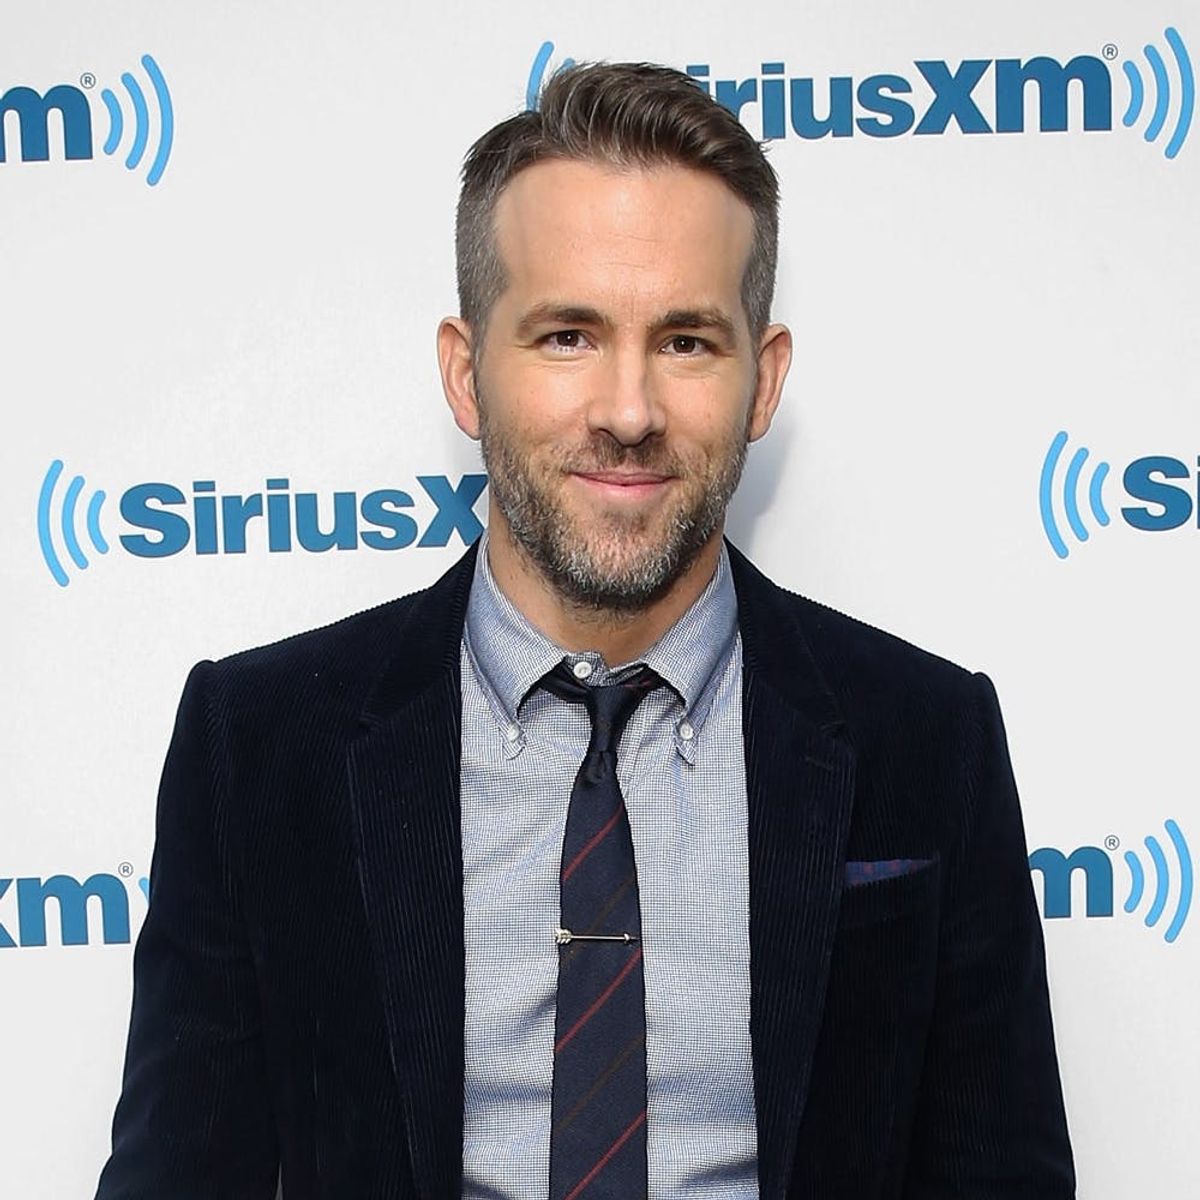 Ryan Reynolds Being (Viciously) Interviewed by His “Twin” Brother Is TOO FUNNY!